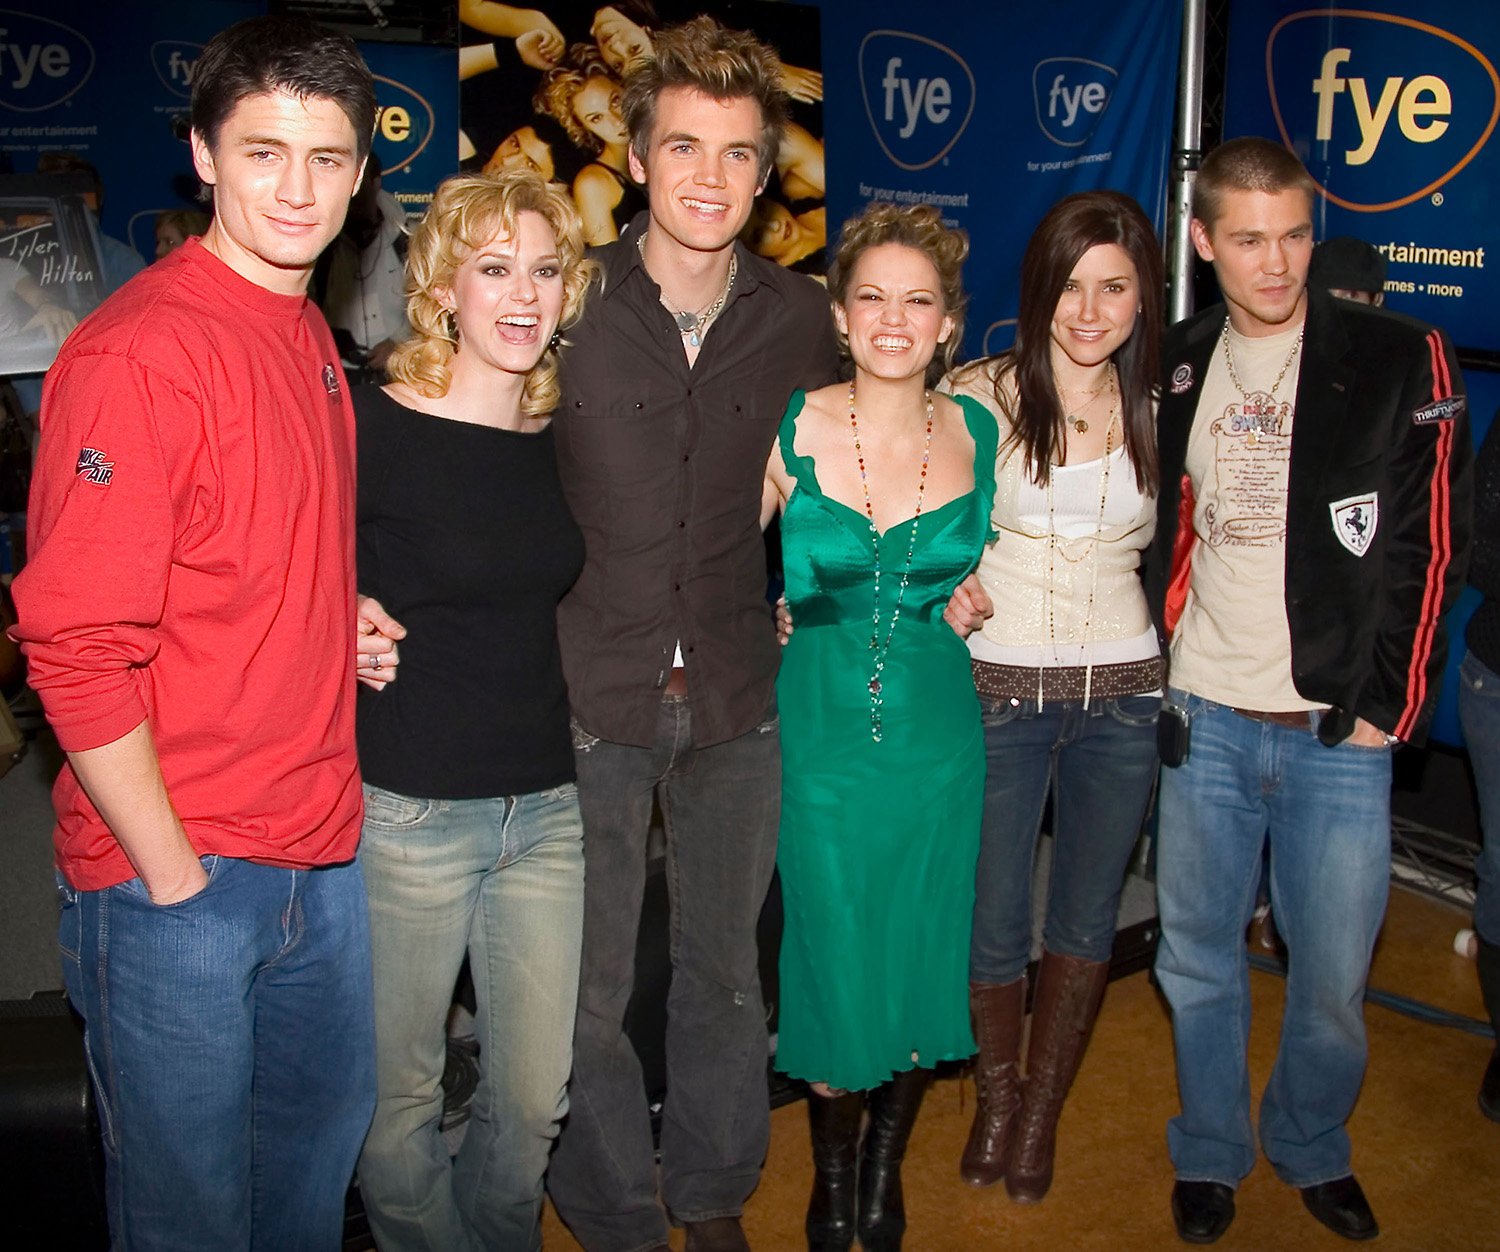 One Tree Hill cast at FYE in 2004